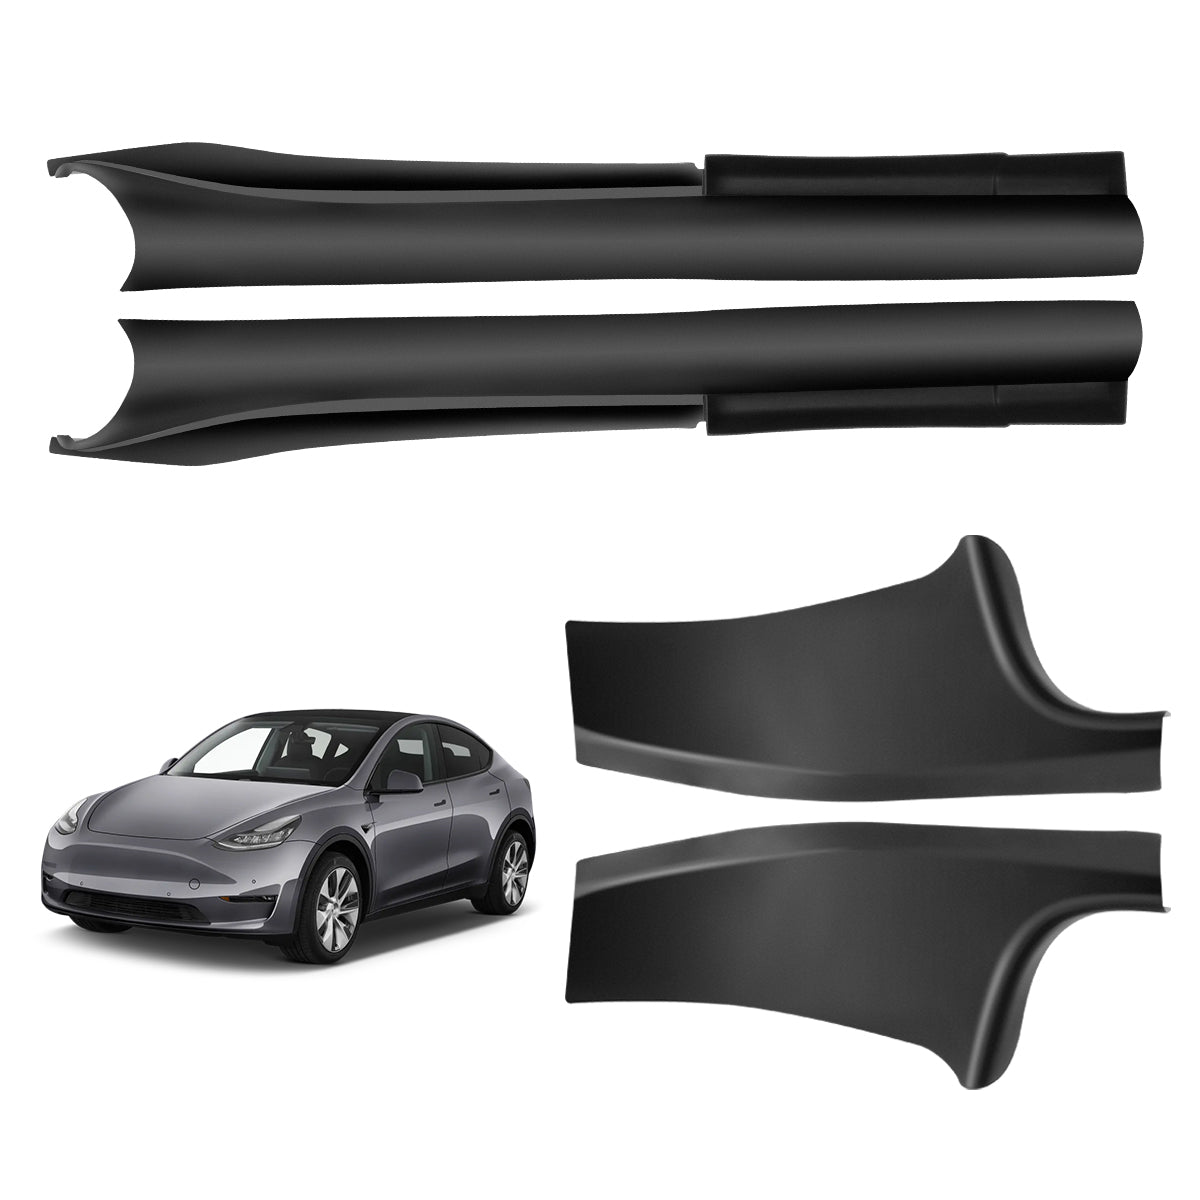 2x Car PU Leather Rear Door Sill Protector Cover Fit for Tesla